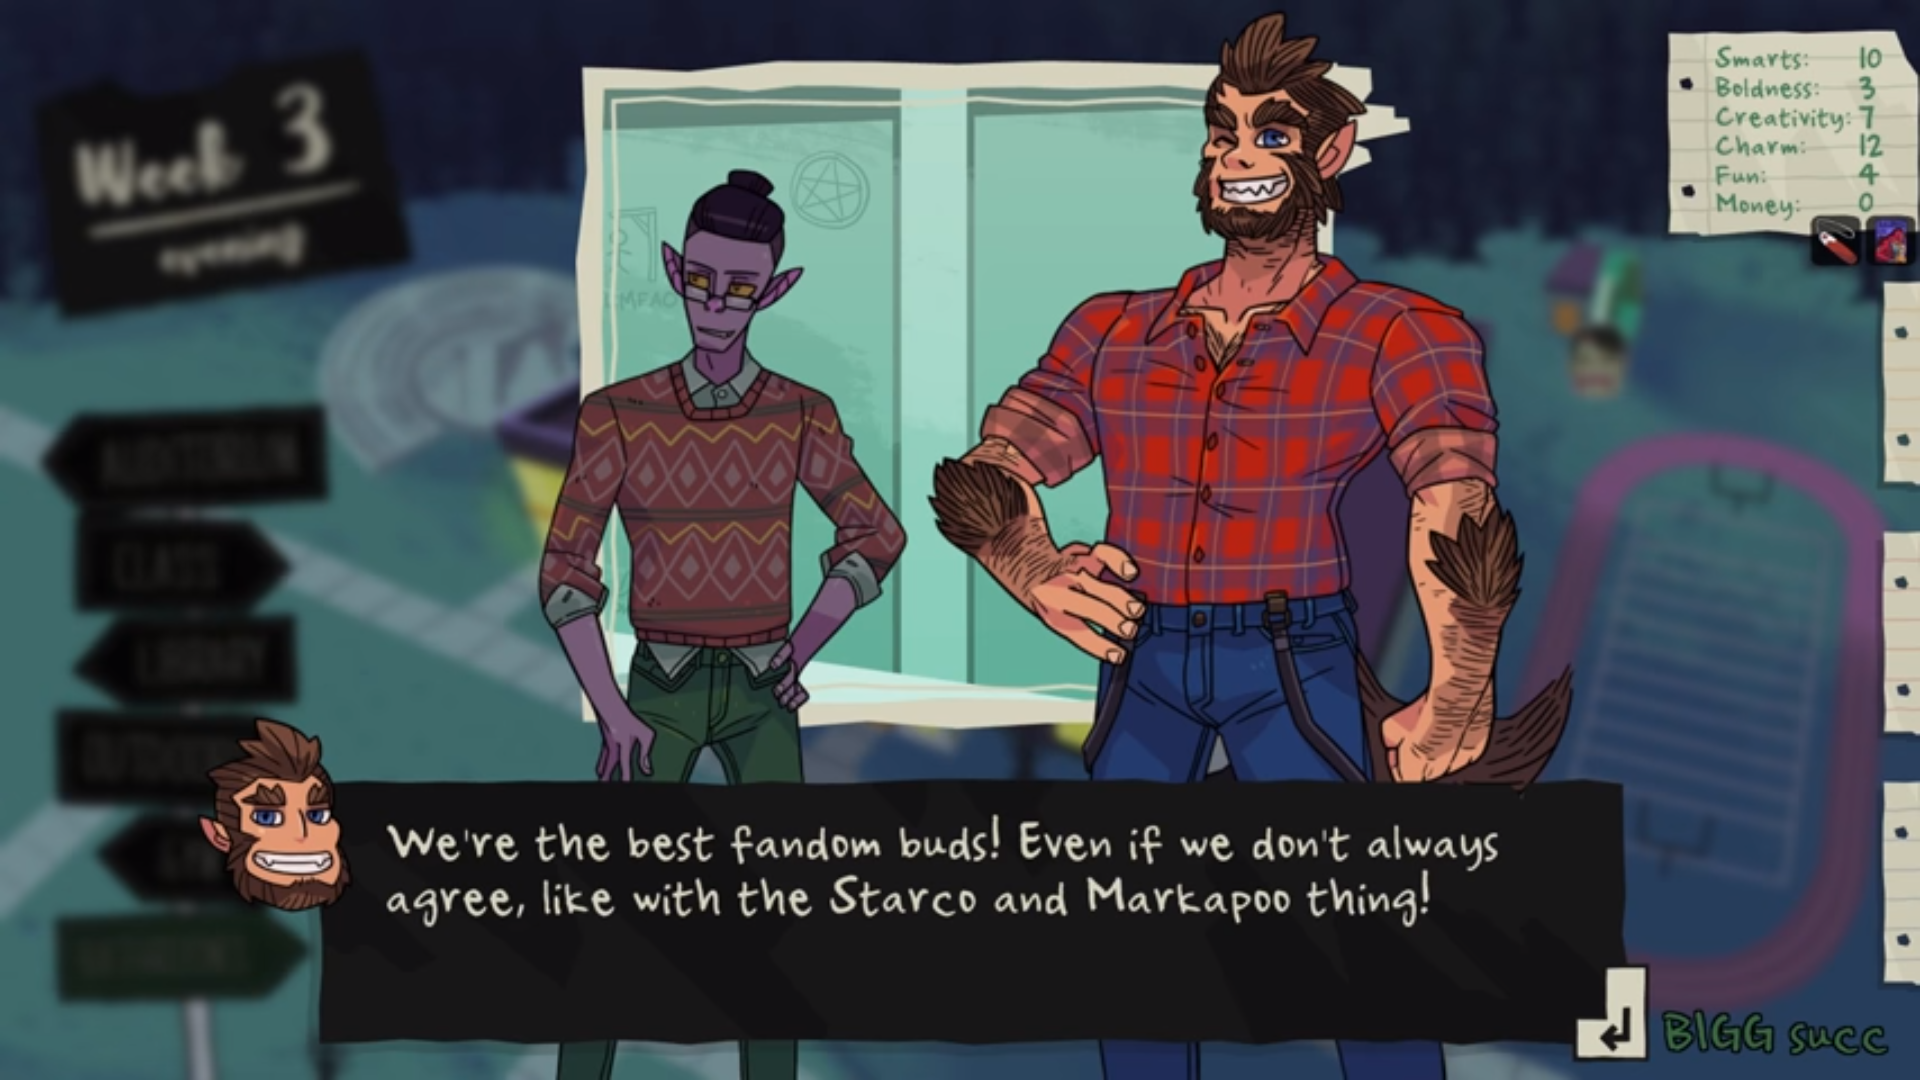 100% a reason to buy Monster Prom from this snippet alone